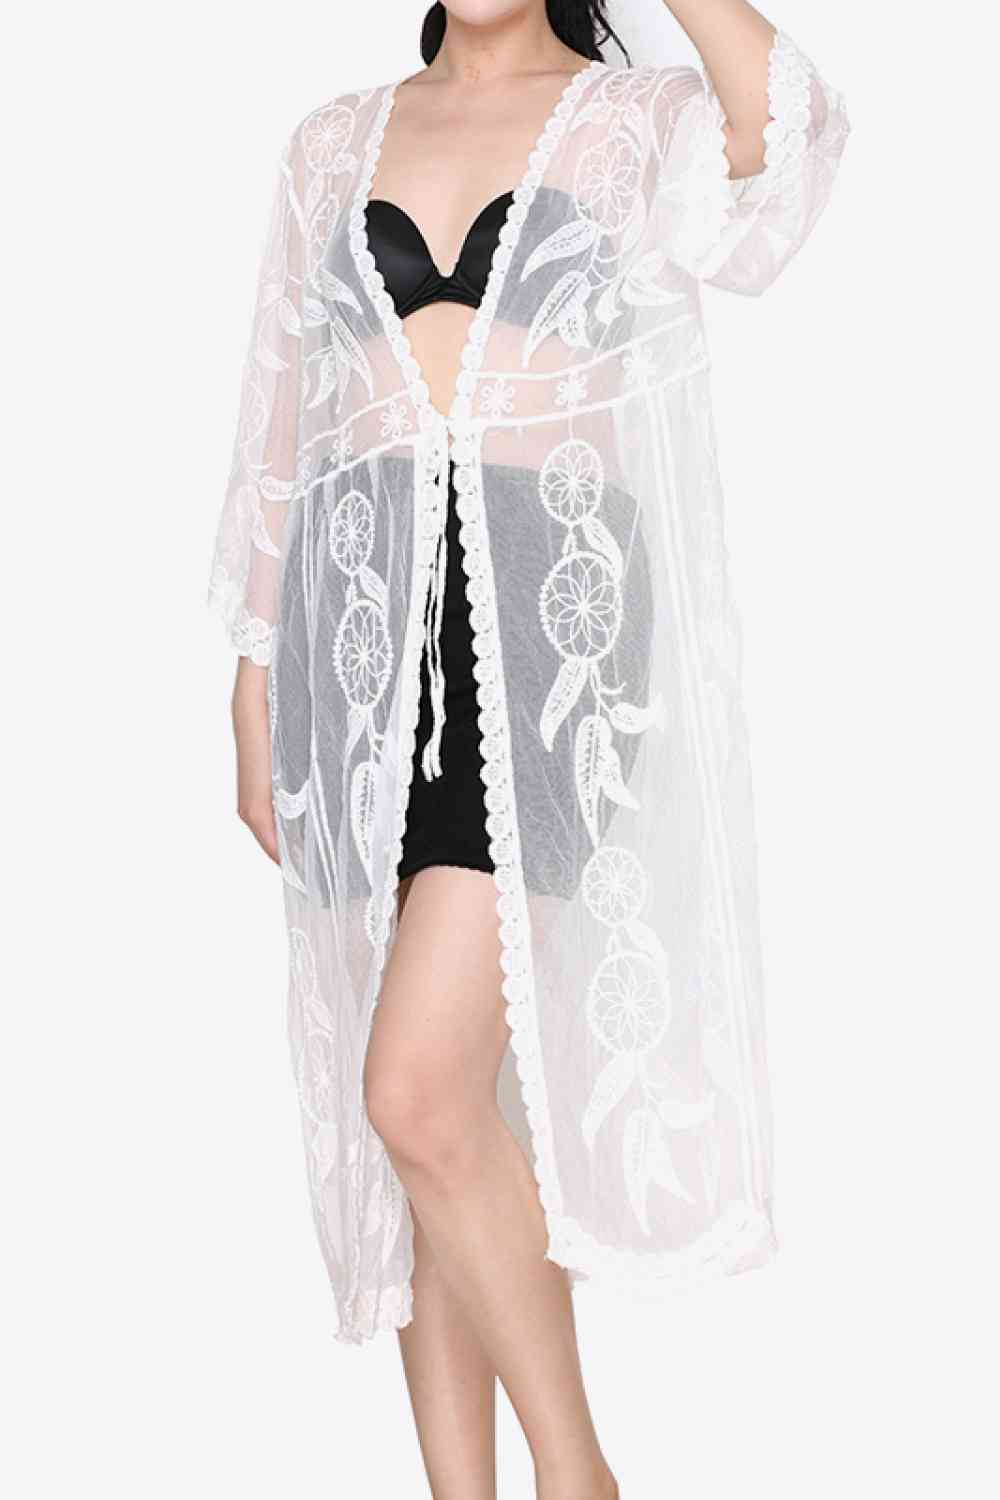 Tied Sheer Cover Up Cardigan White One Size